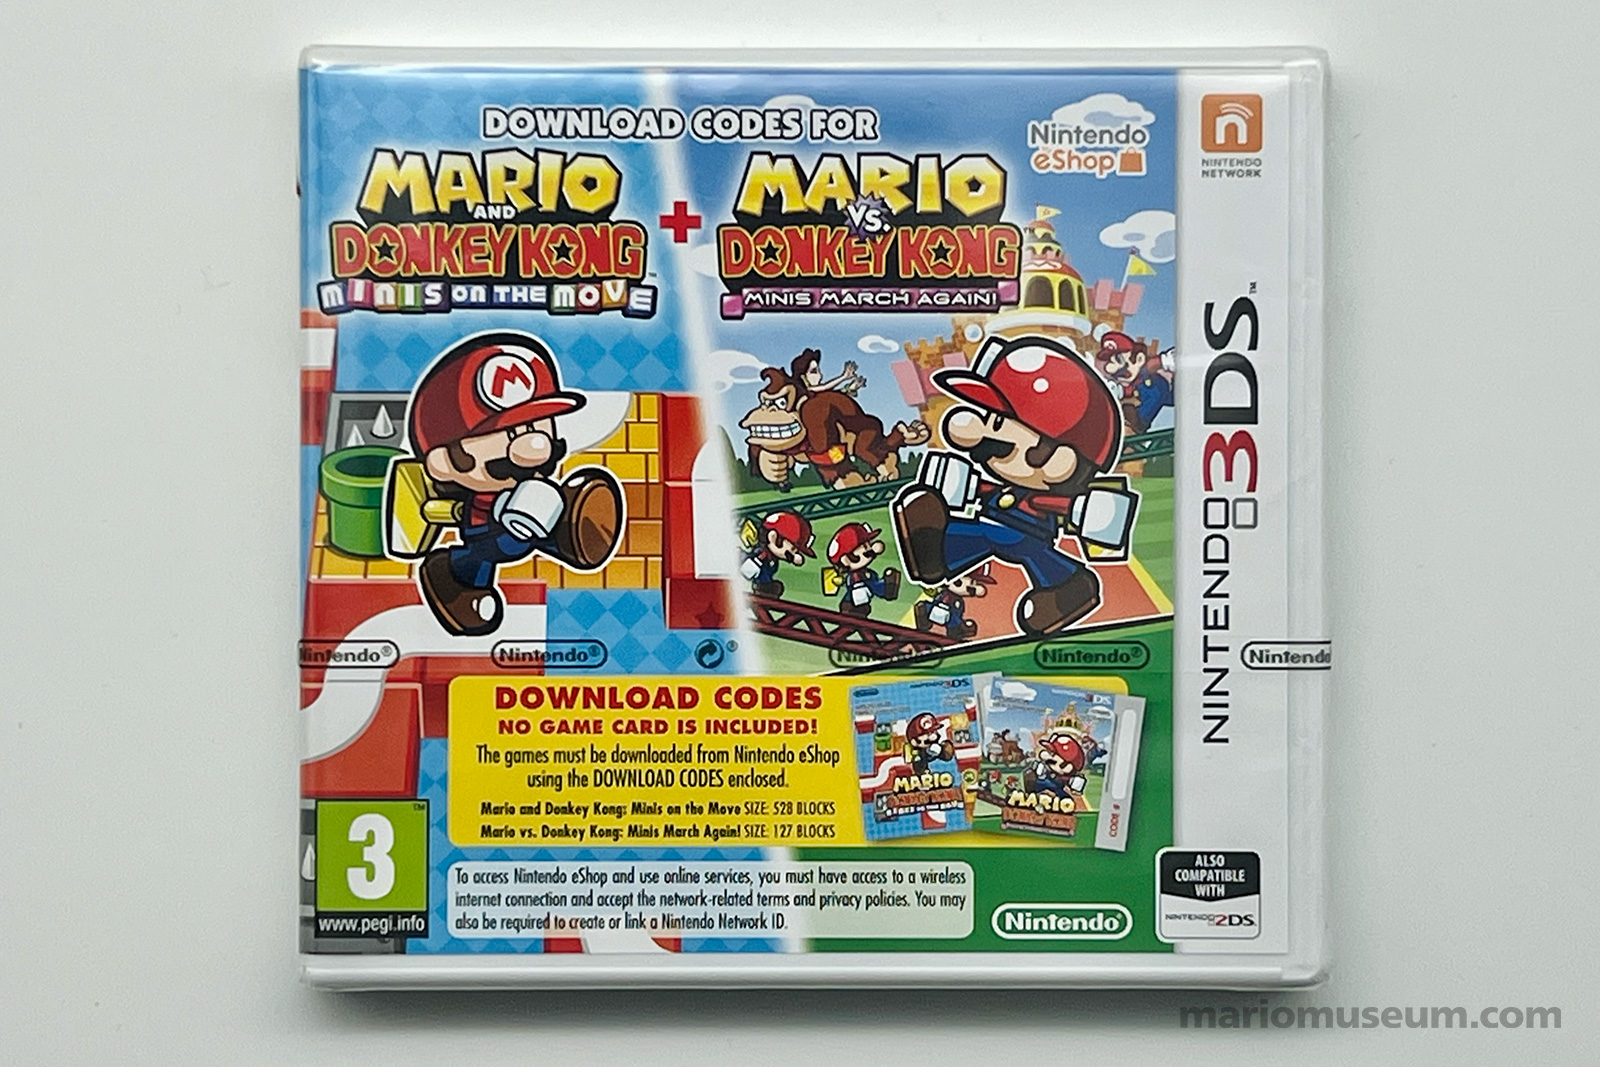 Mario and Donkey Kong: Minis on the Move + Mario vs. Donkey Kong: Minis March Again!, 3DS